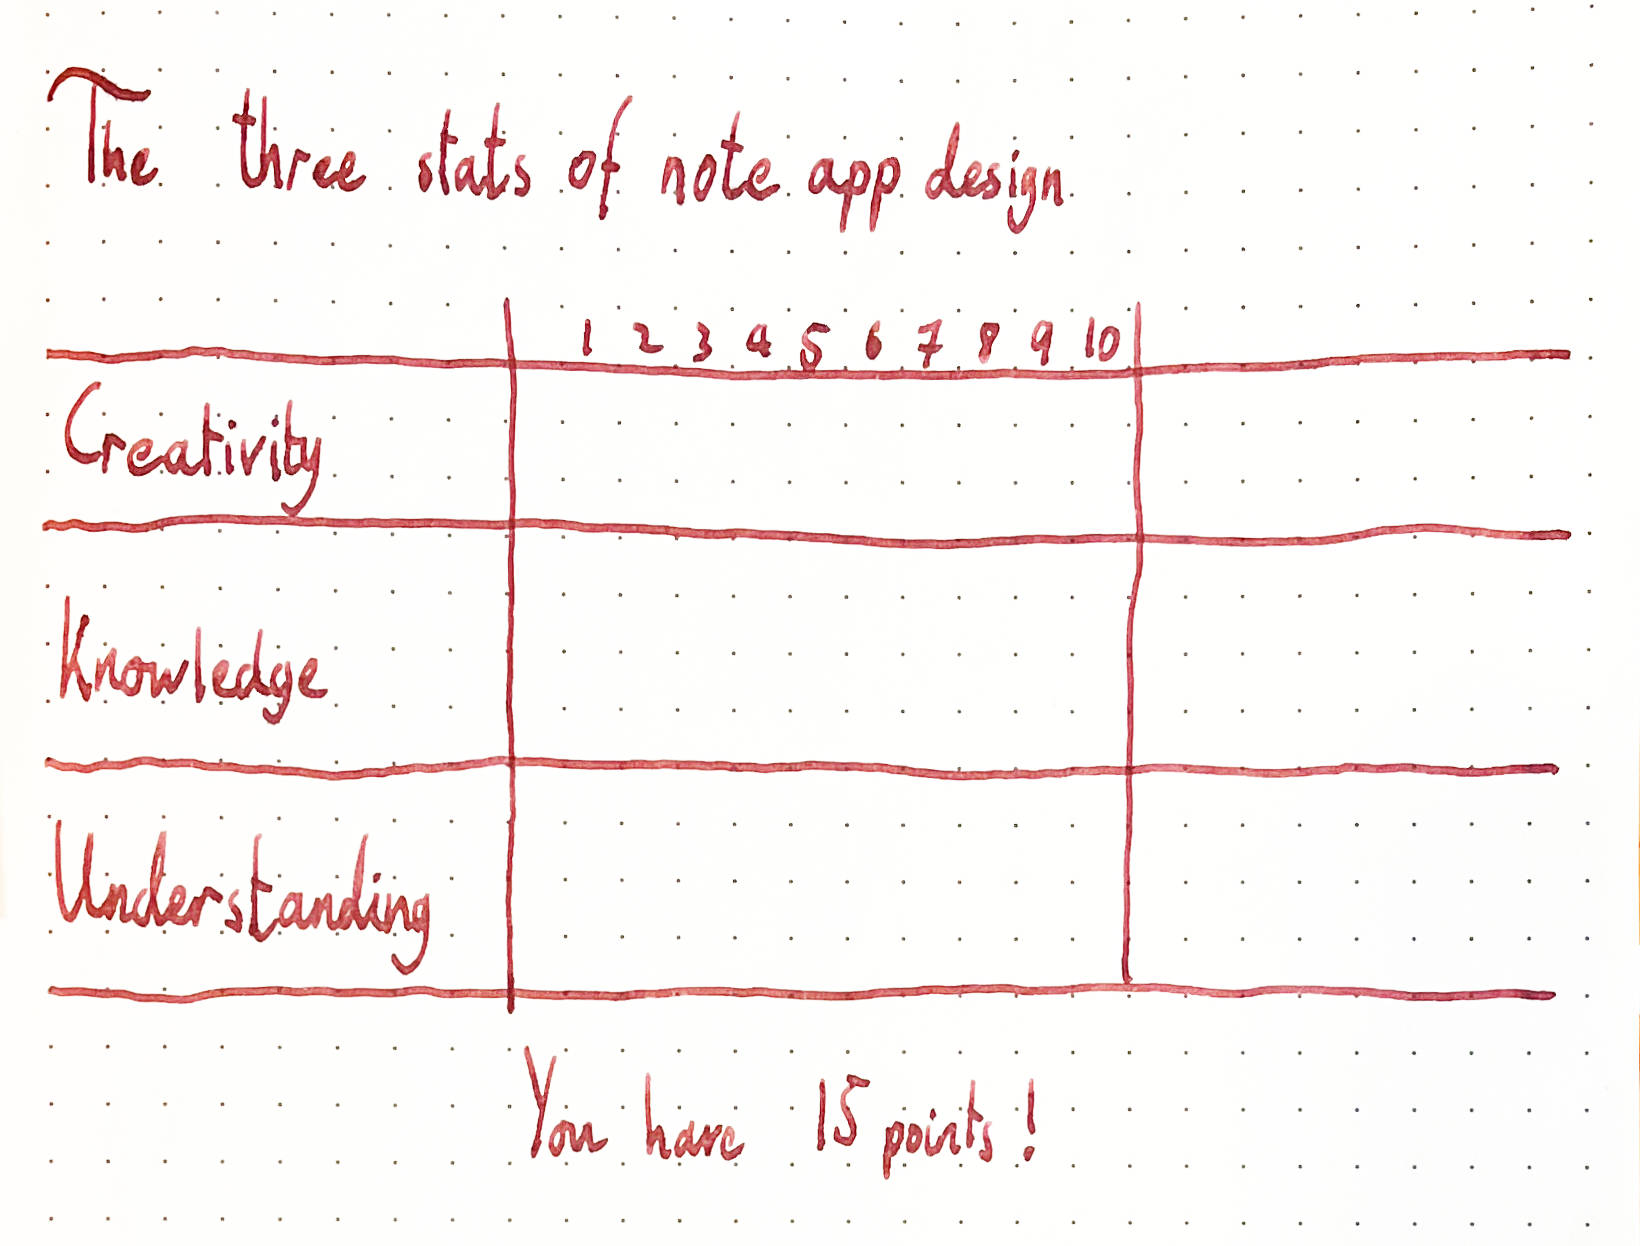 'The three stats of note app design.' Followed by a table where Creativity, Knowledge, and Understanding run down the side and the numbers 1-10 run along the top. At the bottom: 'You have 15 points!'